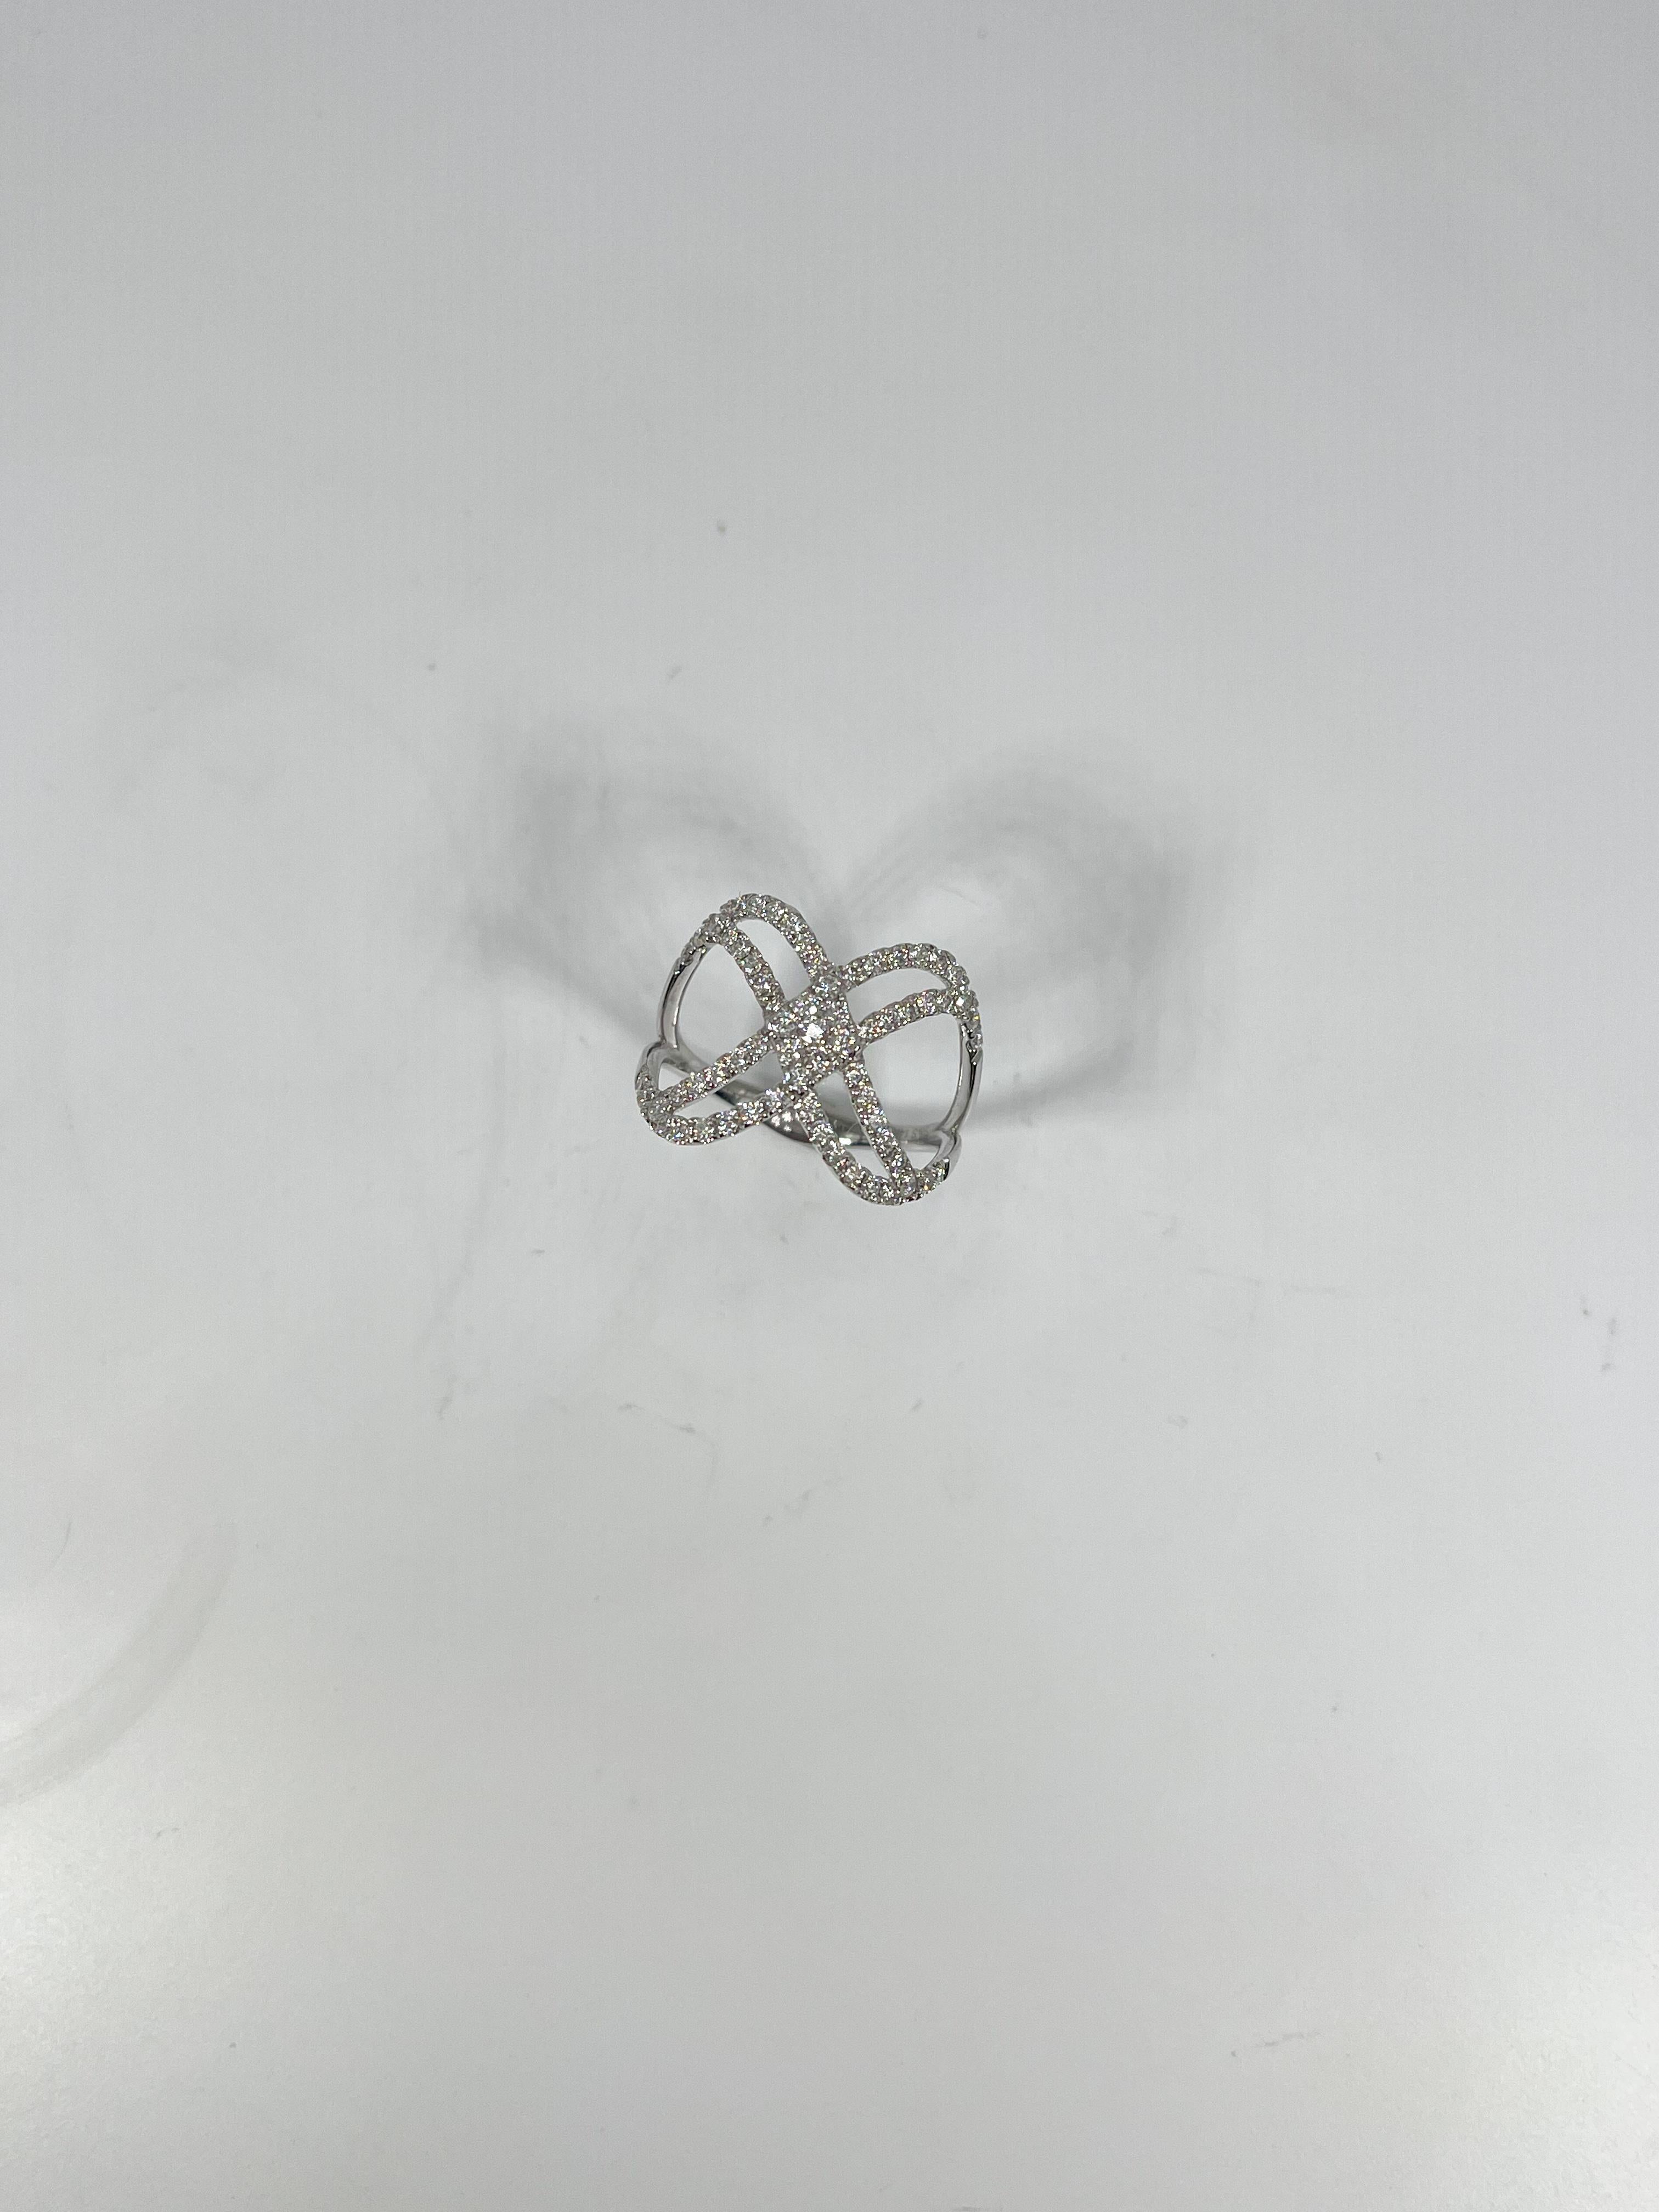 14k white gold .63 CTW contemporary diamond ring. The diamonds in this ring are all round, ring is a size 6 3/4, the width is 15 mm, and it has a total weight of 2.9 grams. 